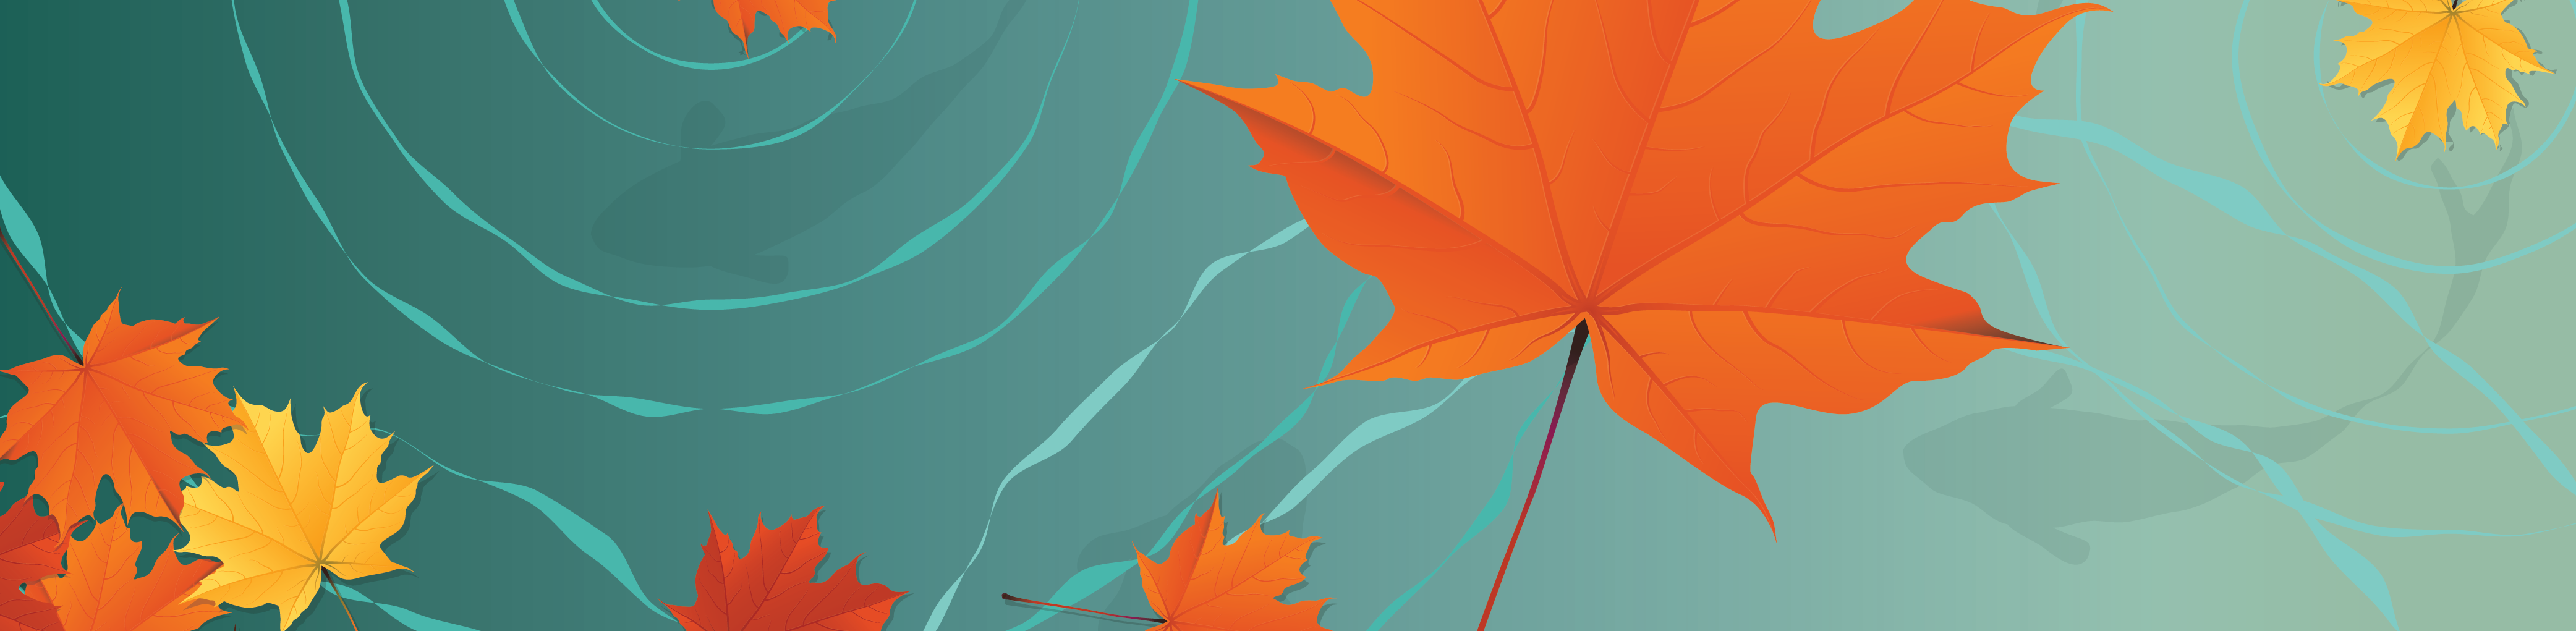 illustration of autumn leaves against a green background